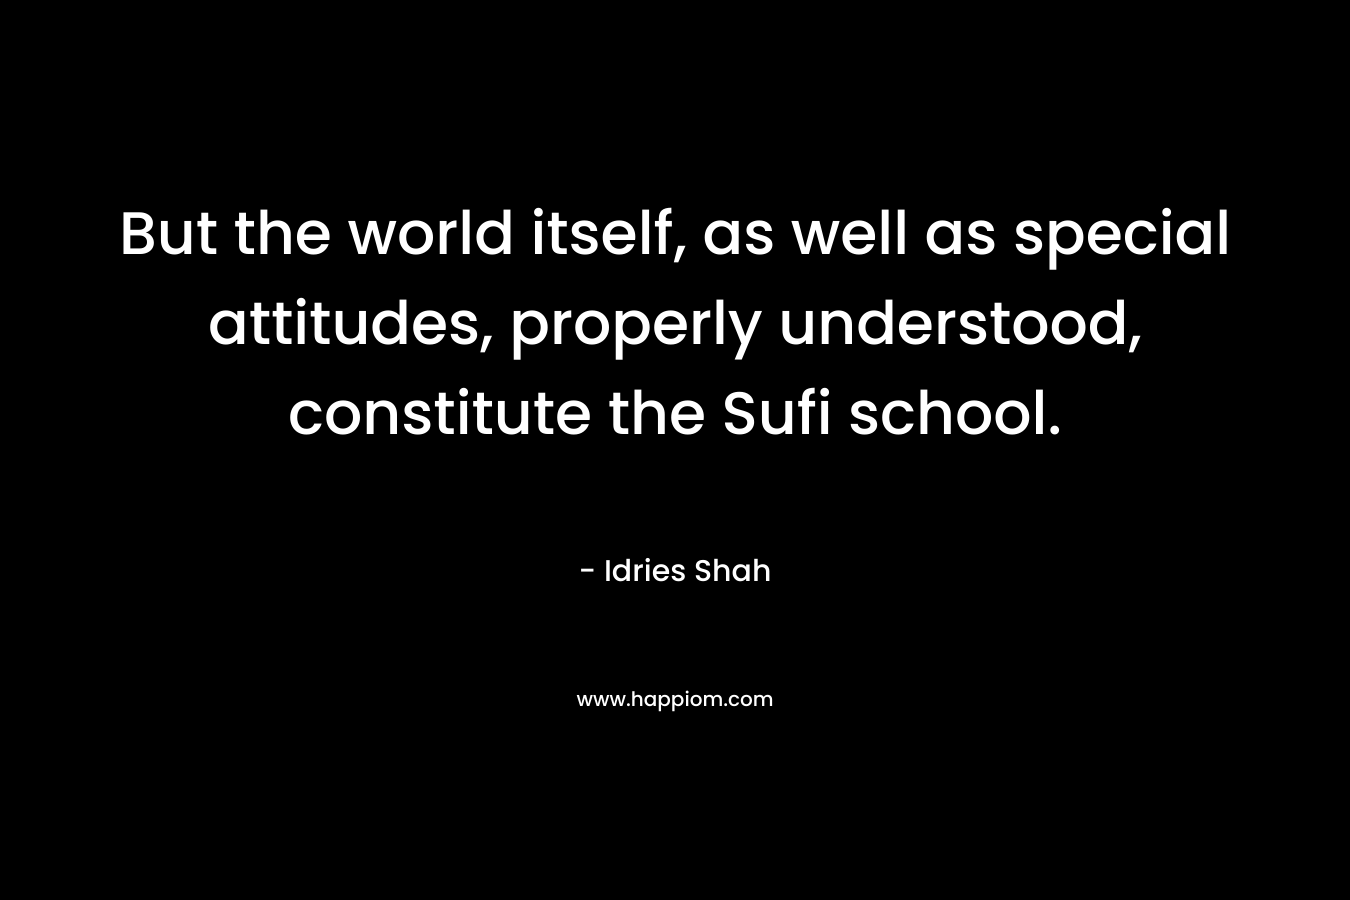 But the world itself, as well as special attitudes, properly understood, constitute the Sufi school. – Idries Shah